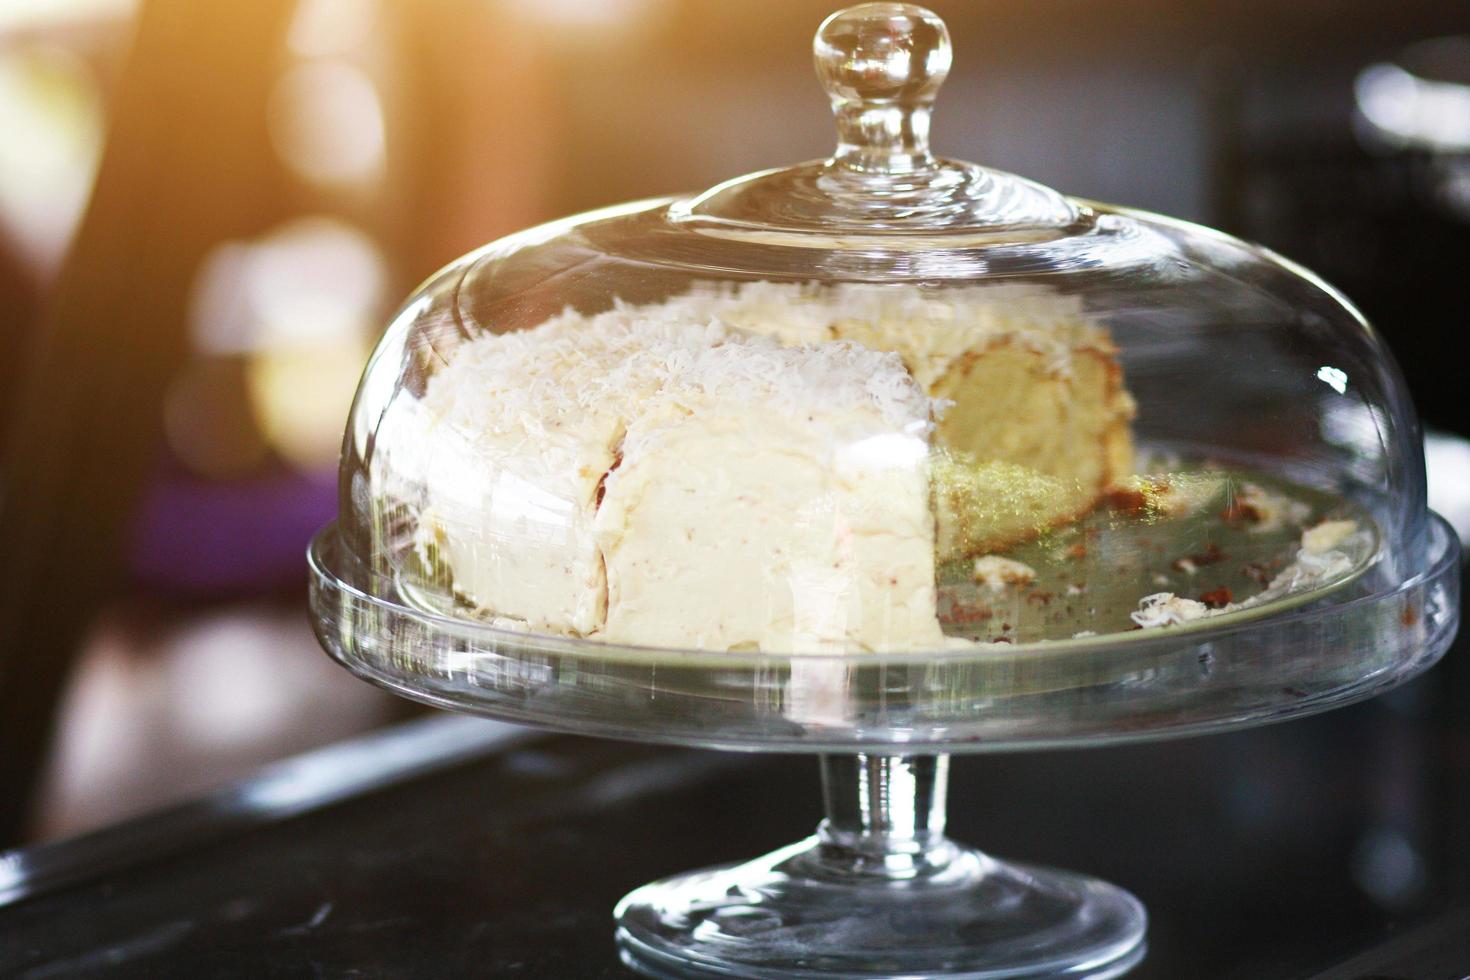 Cake and bakery in a glass tray photo